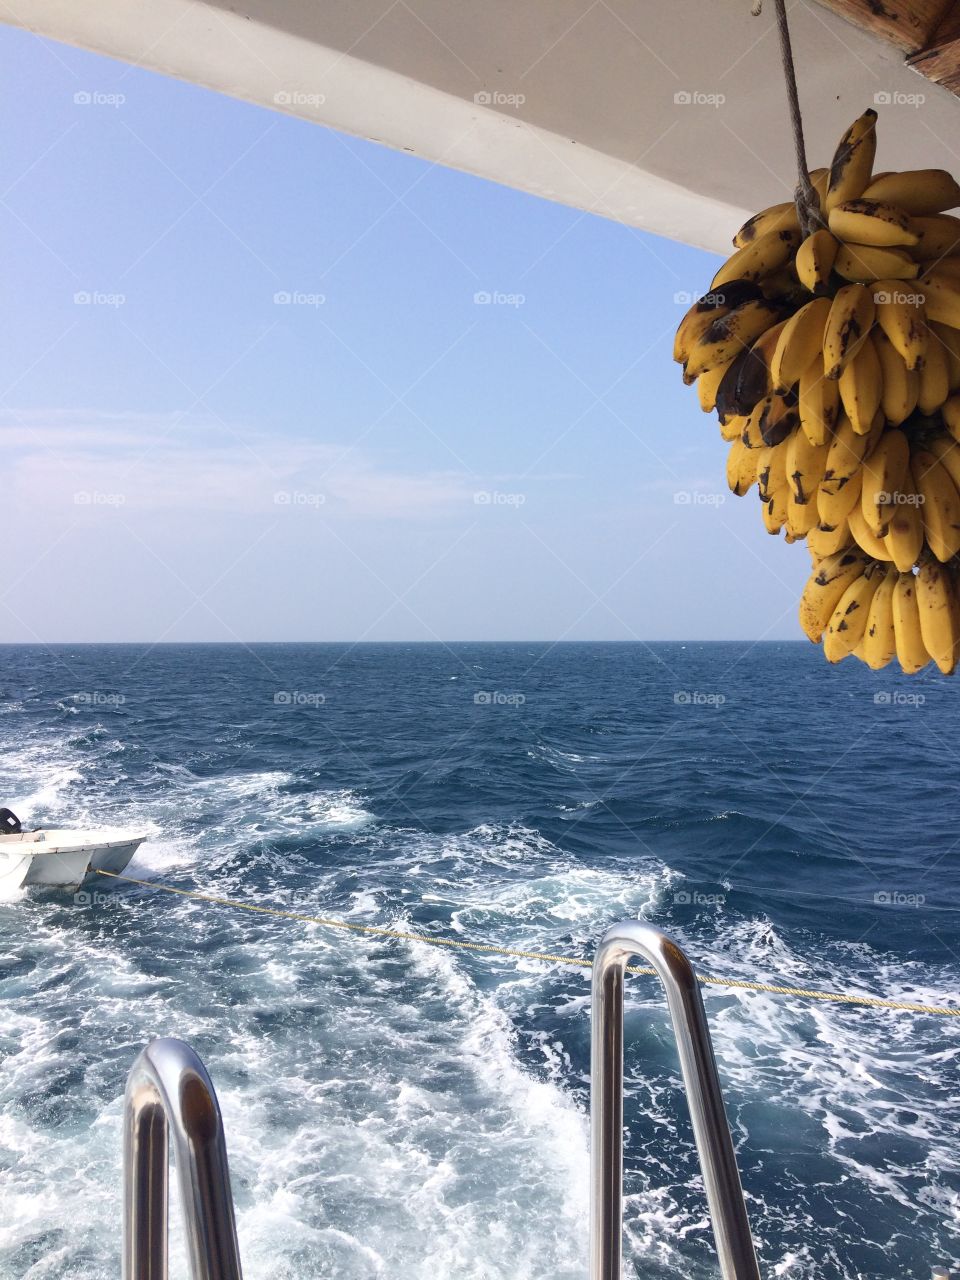 Life on Board a Ferry and some bananas